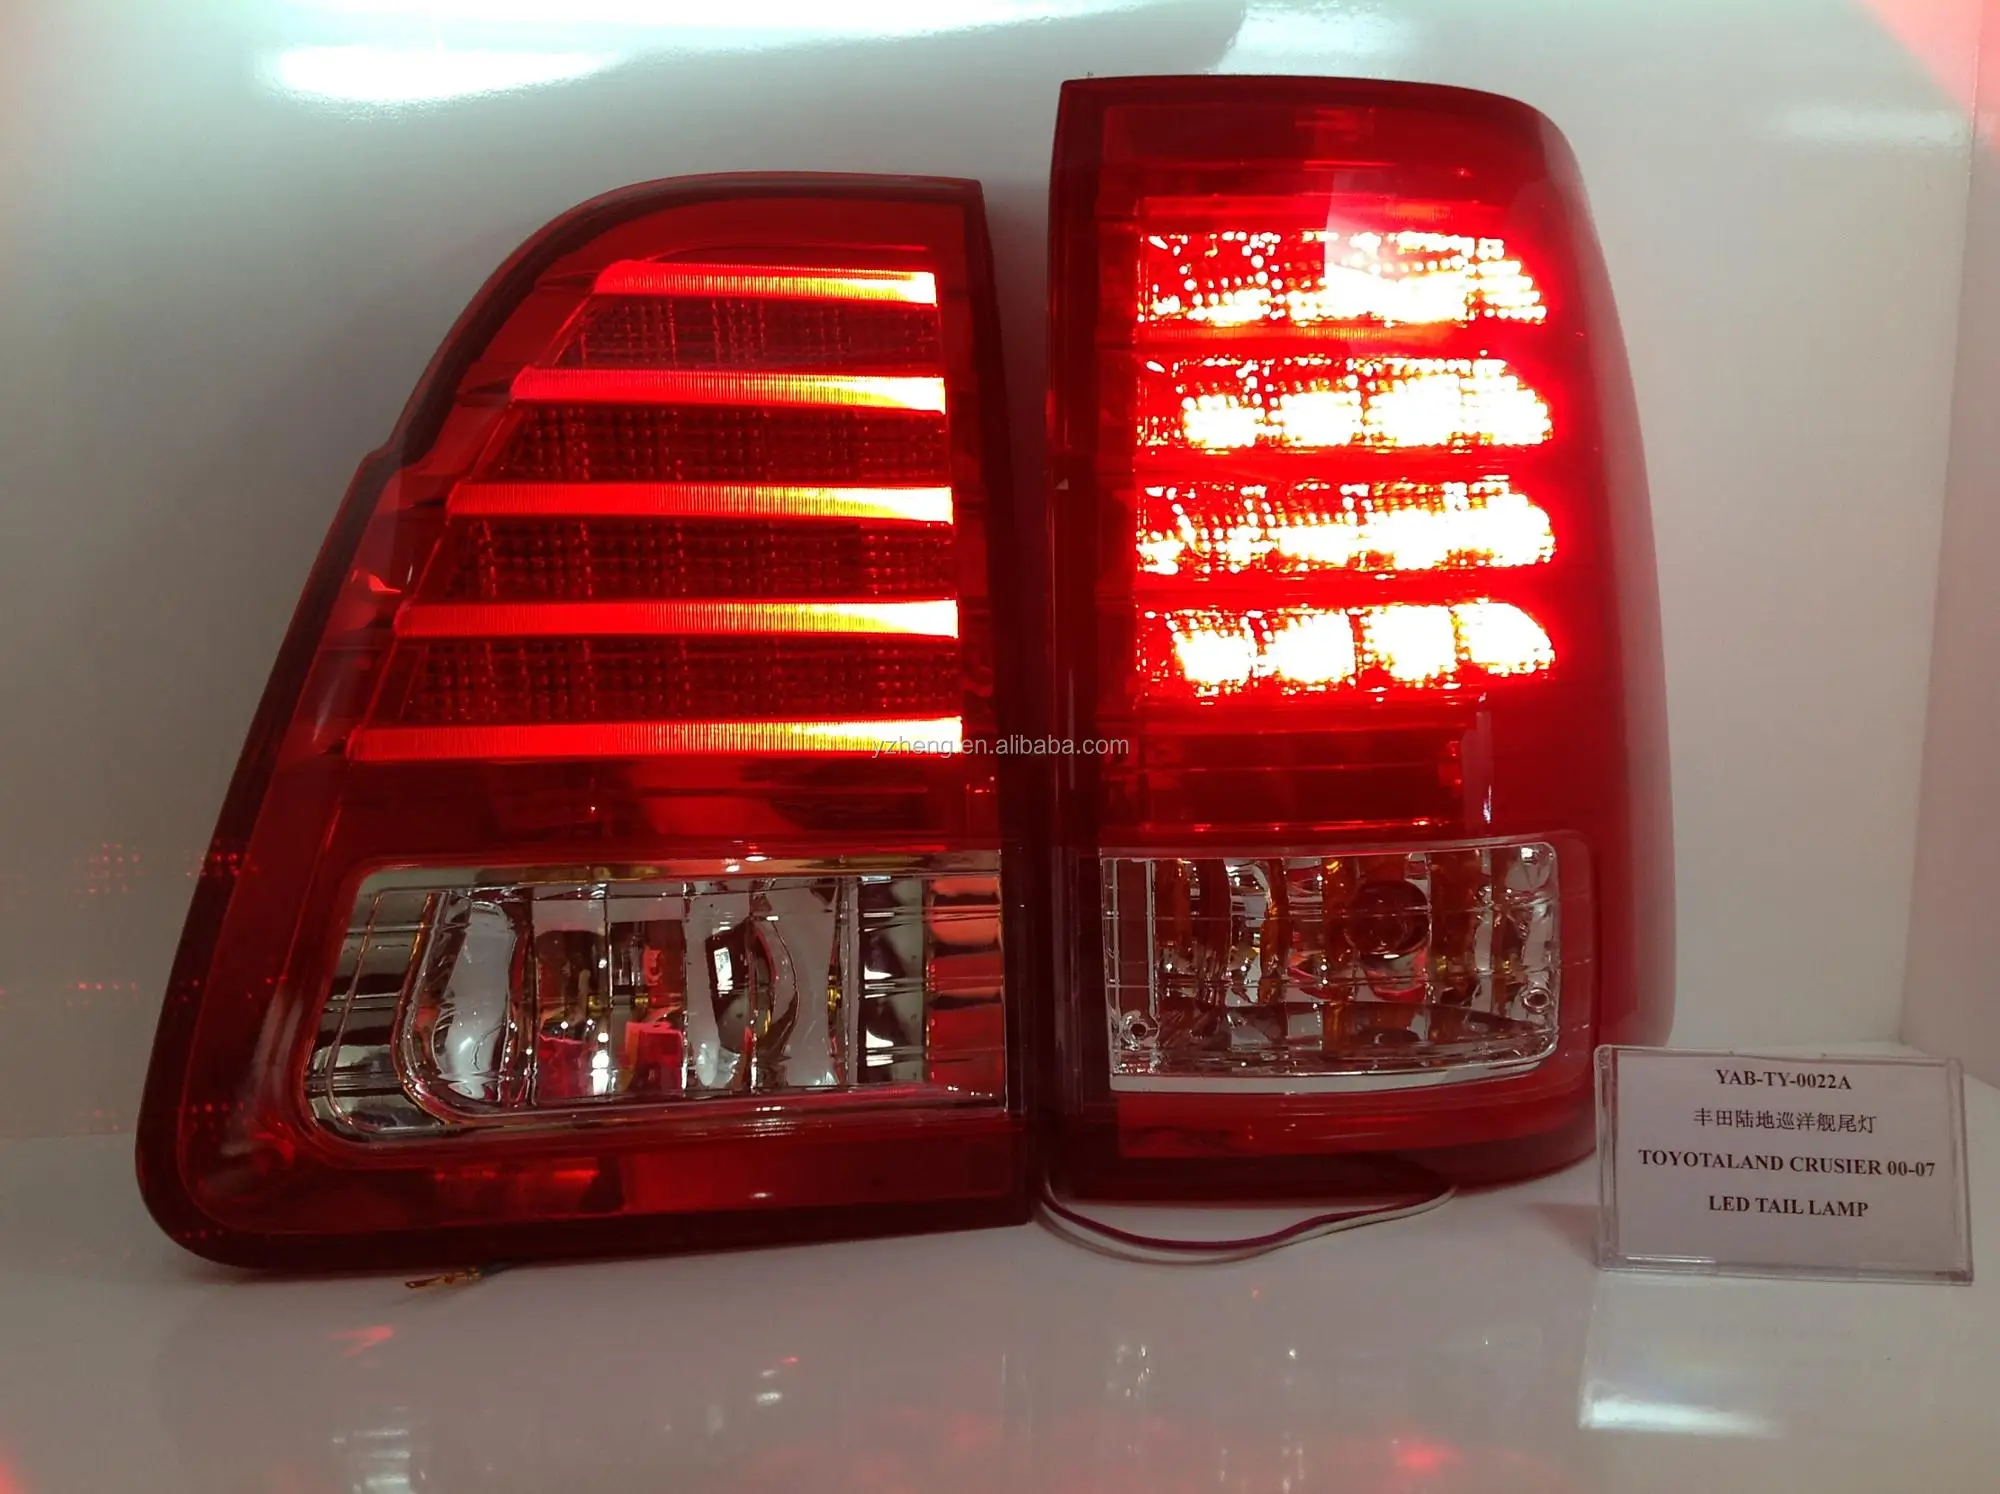 VLAND factory car taillamp for LAND CRUISER 2000-2007 LED tail lights plug and play for FJ100 LED taillights